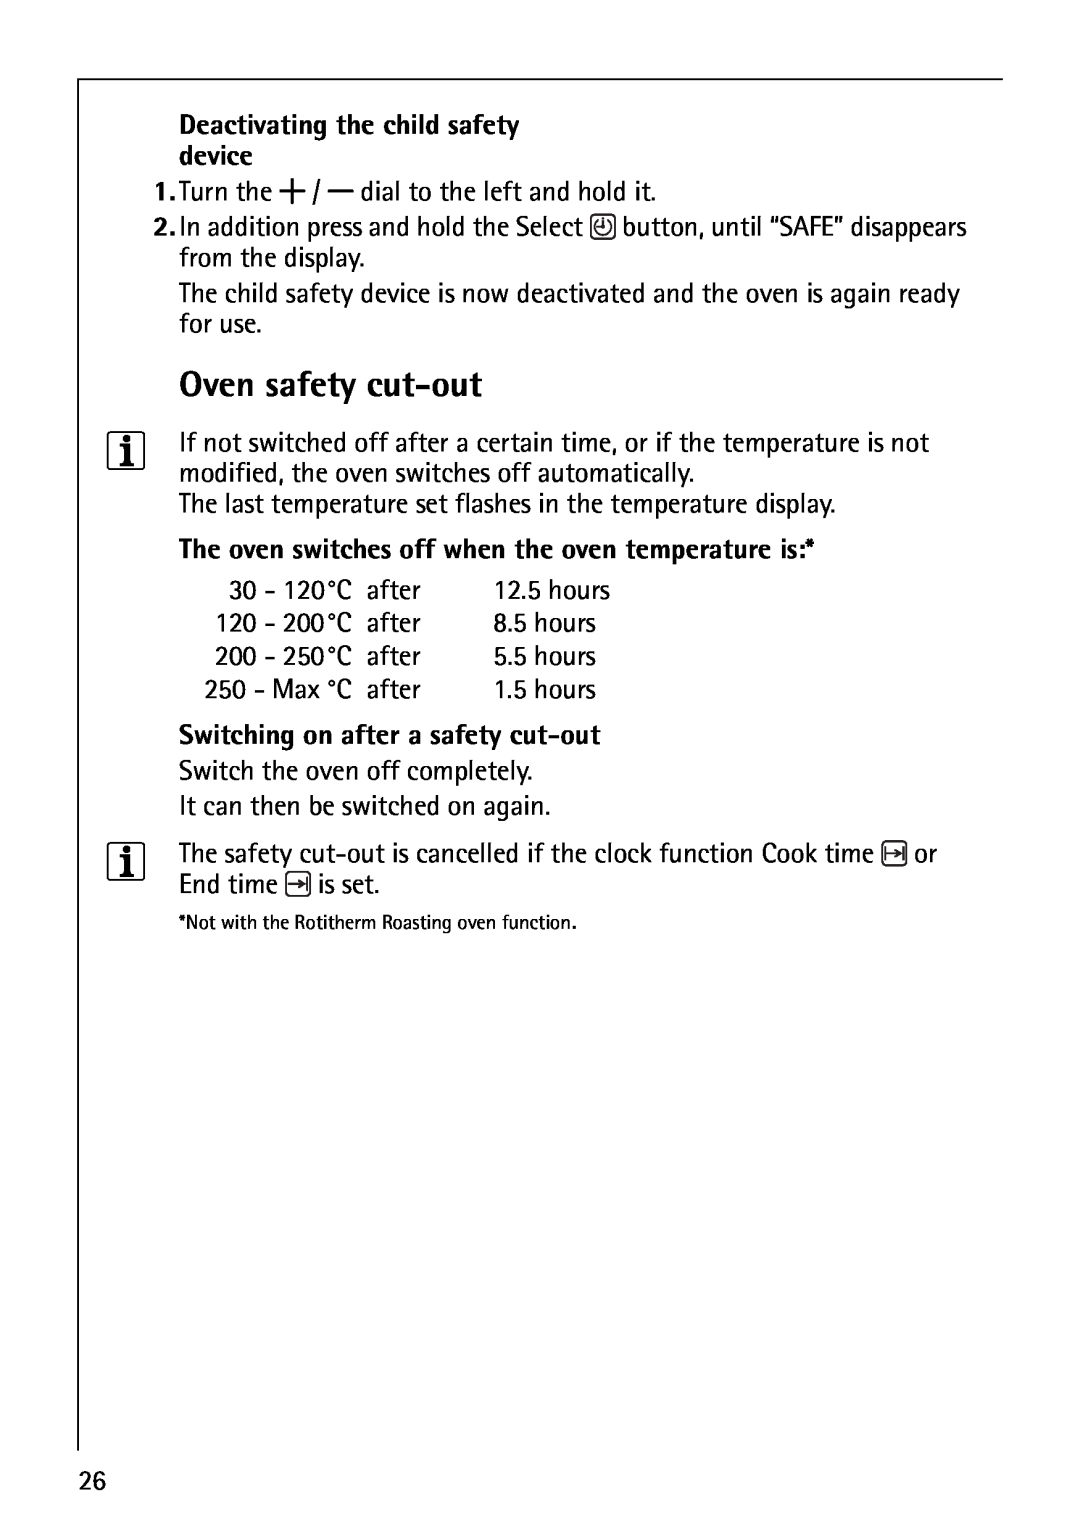 Electrolux B5741-4 manual Oven safety cut-out, Deactivating the child safety device, Switching on after a safety cut-out 